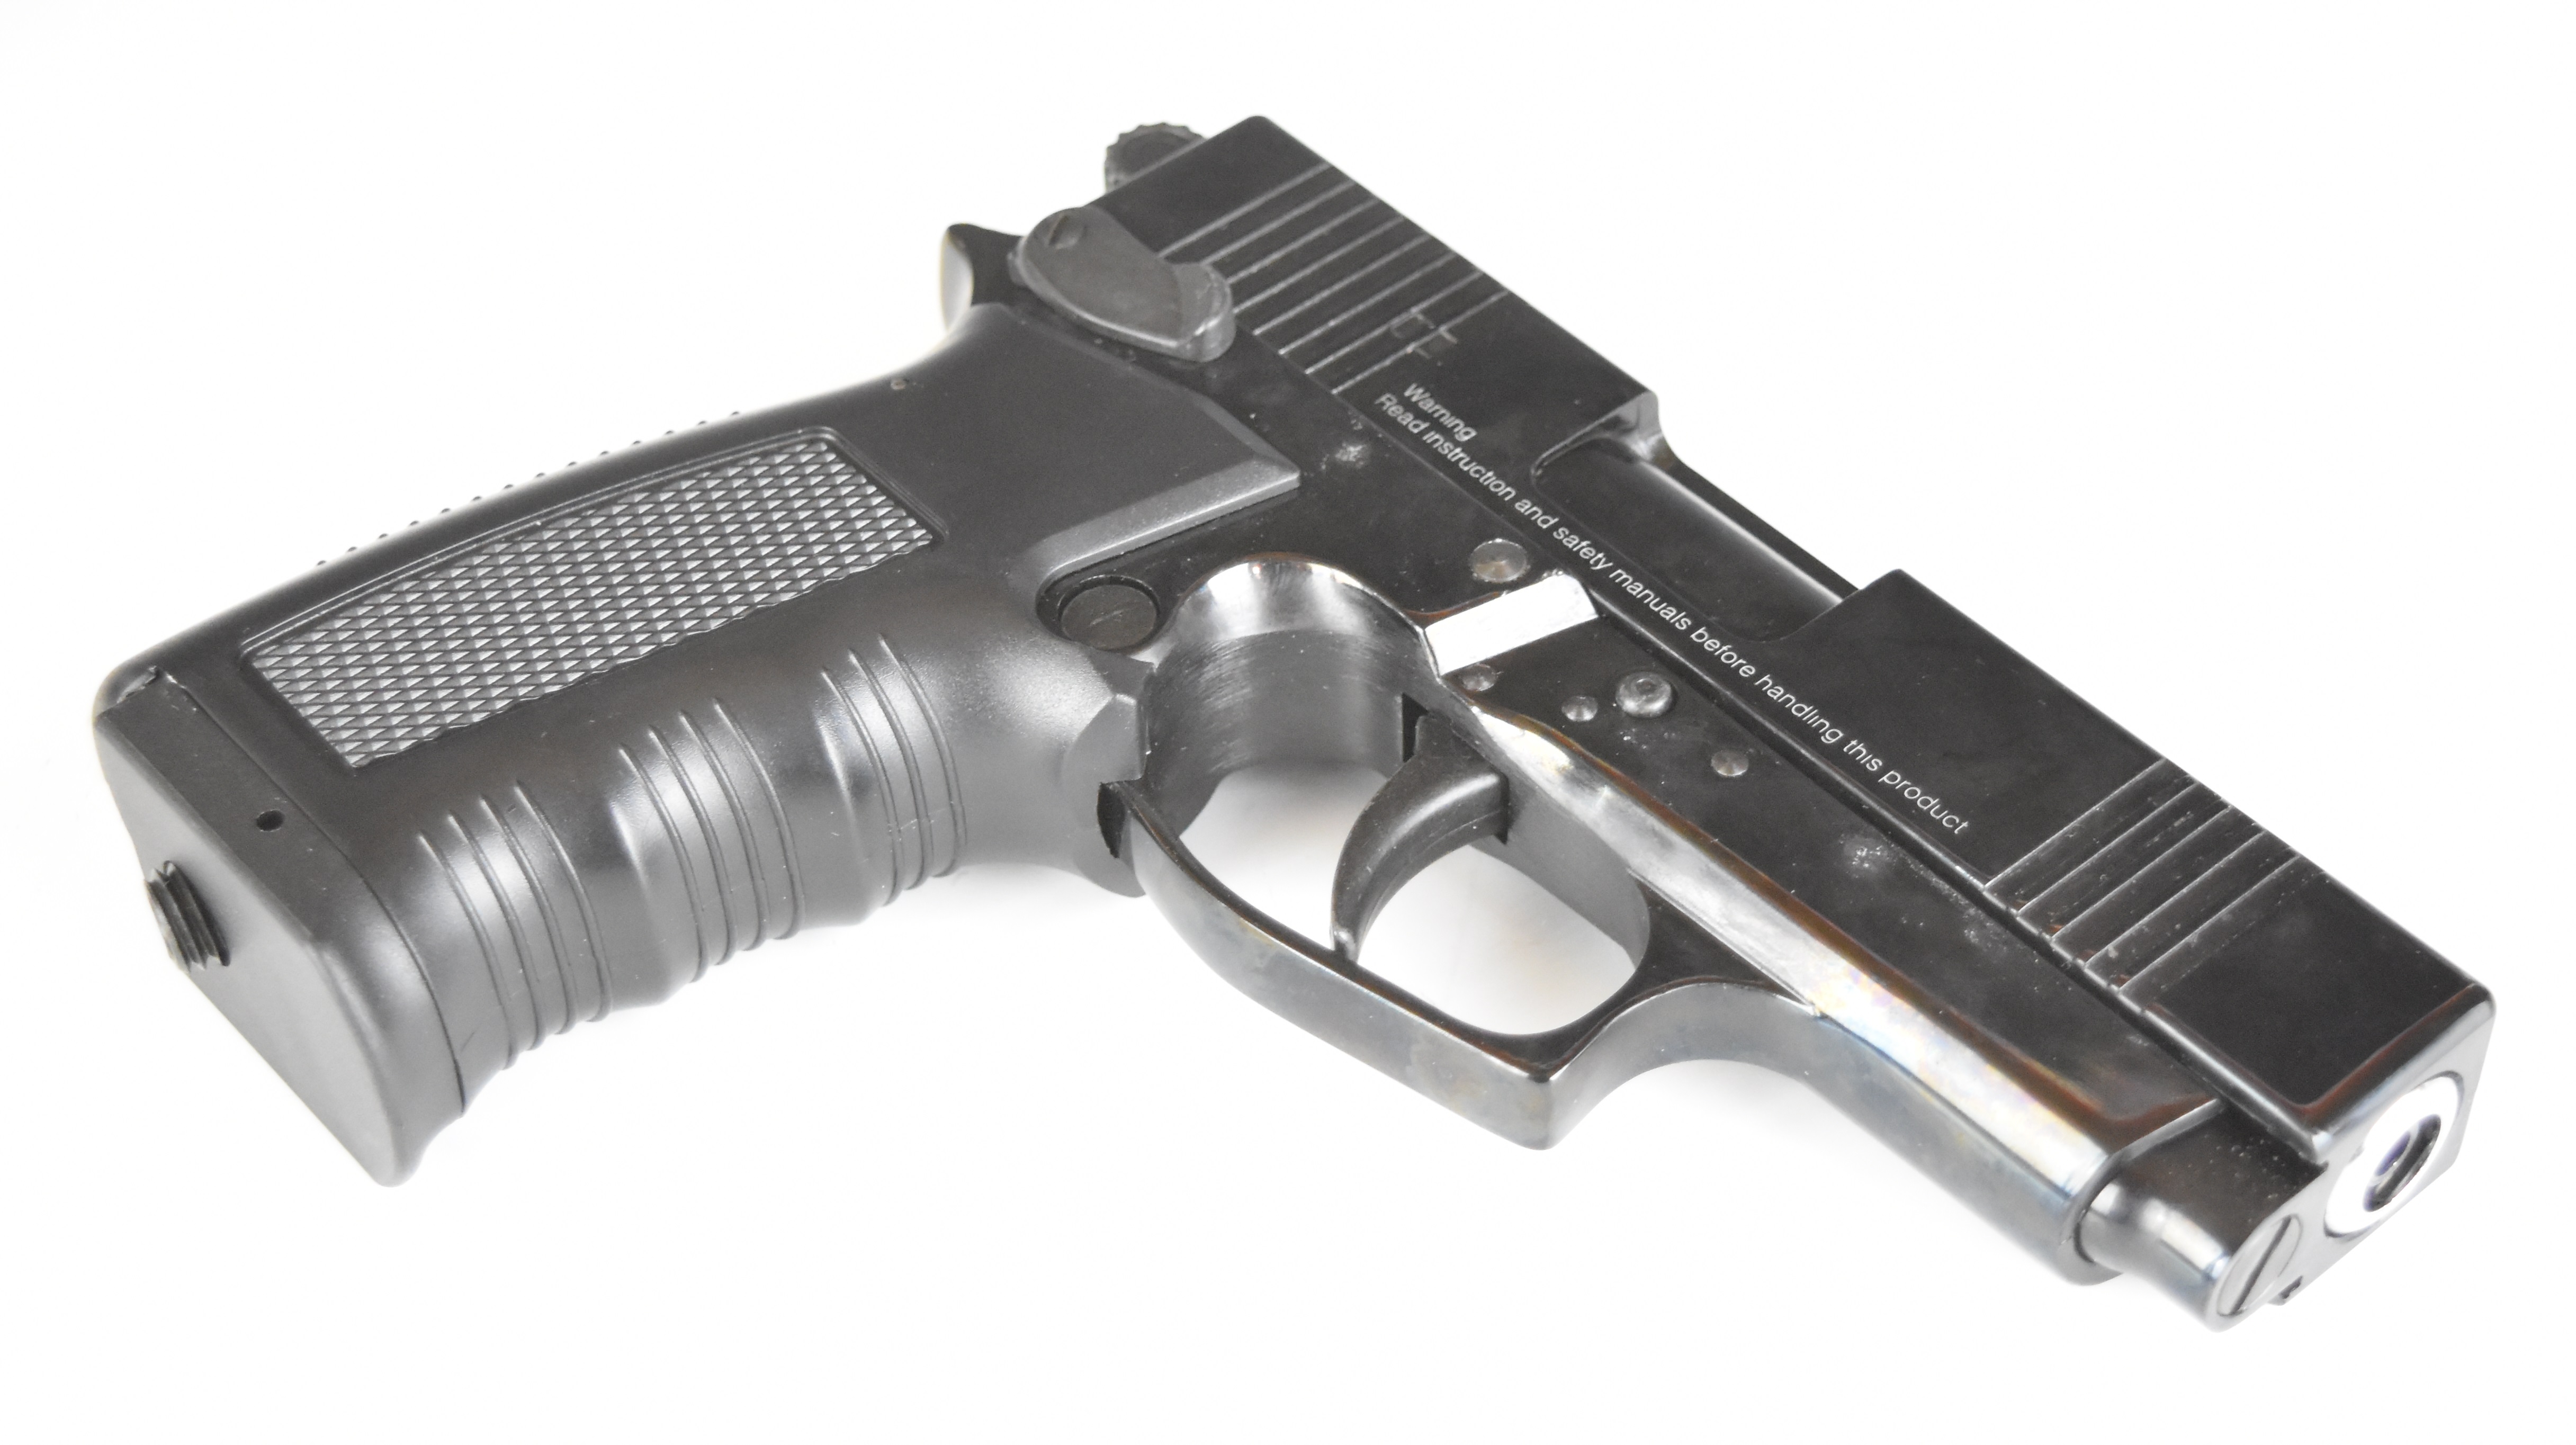 Ekol ES 55 .177 CO2 air pistol with chequered composite grips and fixed sights, serial number 90- - Image 5 of 15